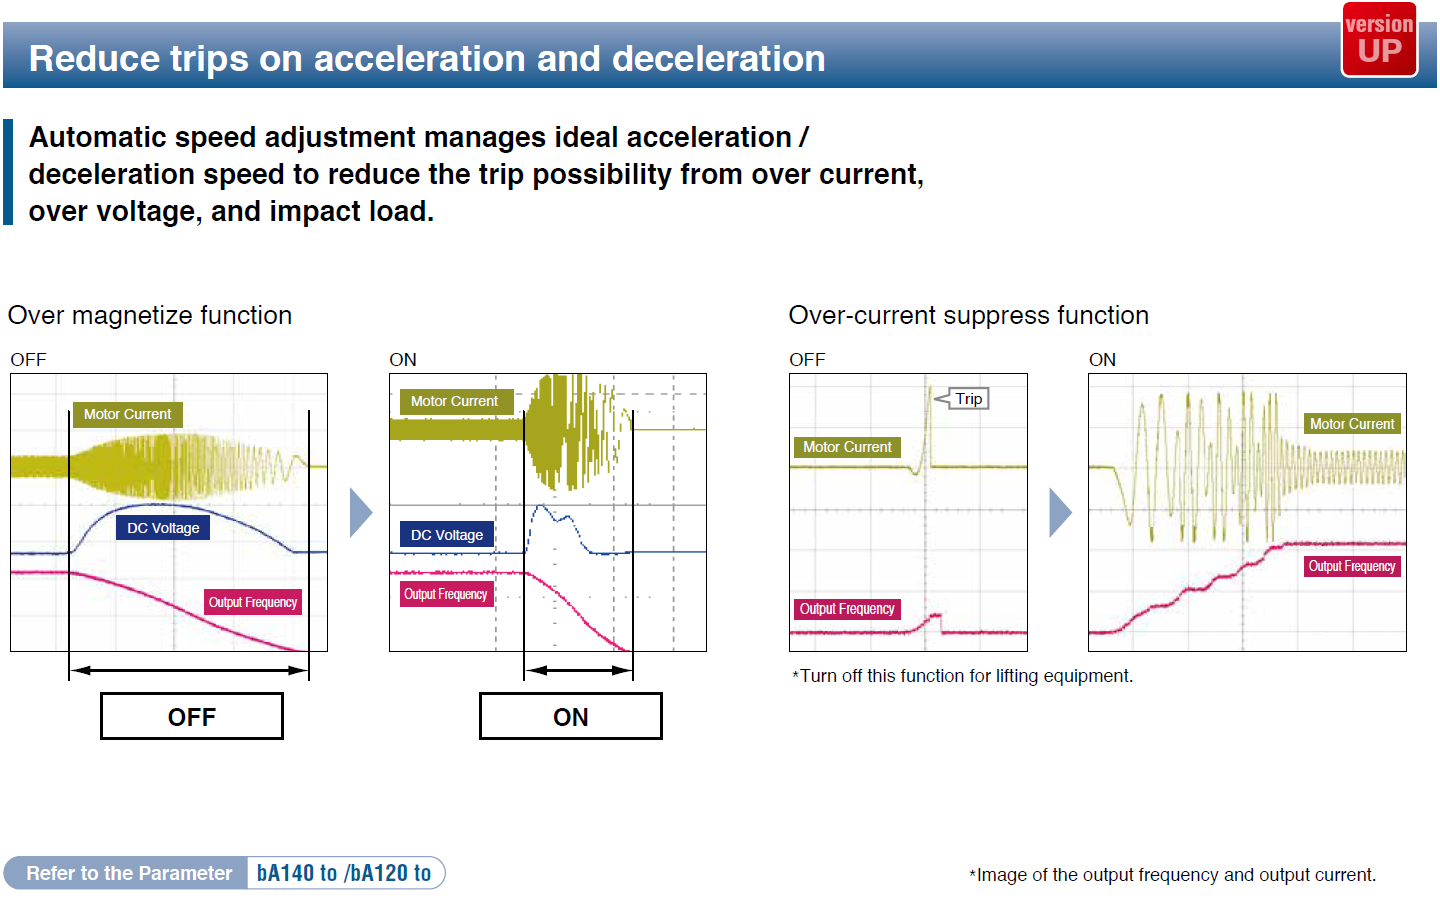 Reduce trips on acceleration and deceleration